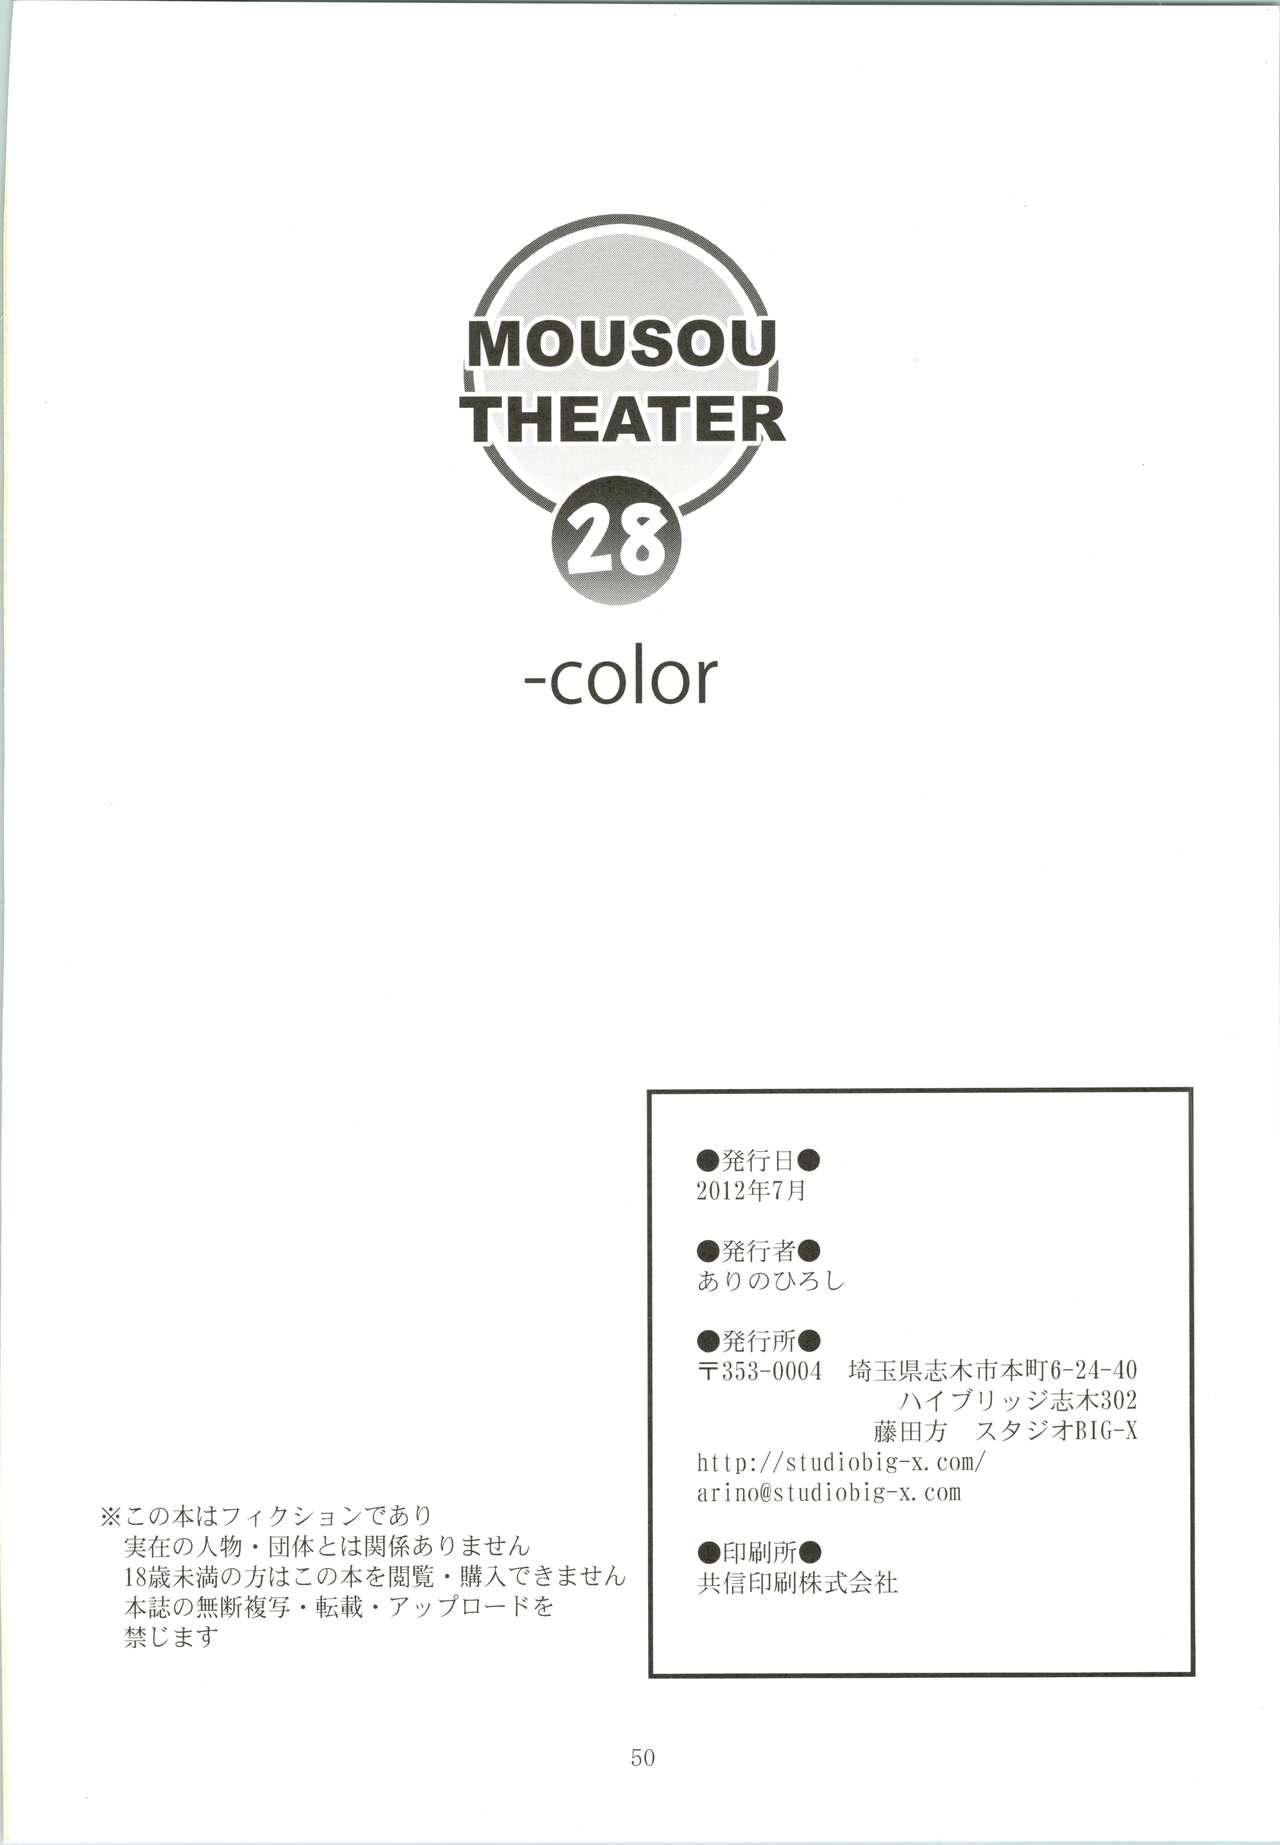 MOUSOU THEATER 28 -color 52